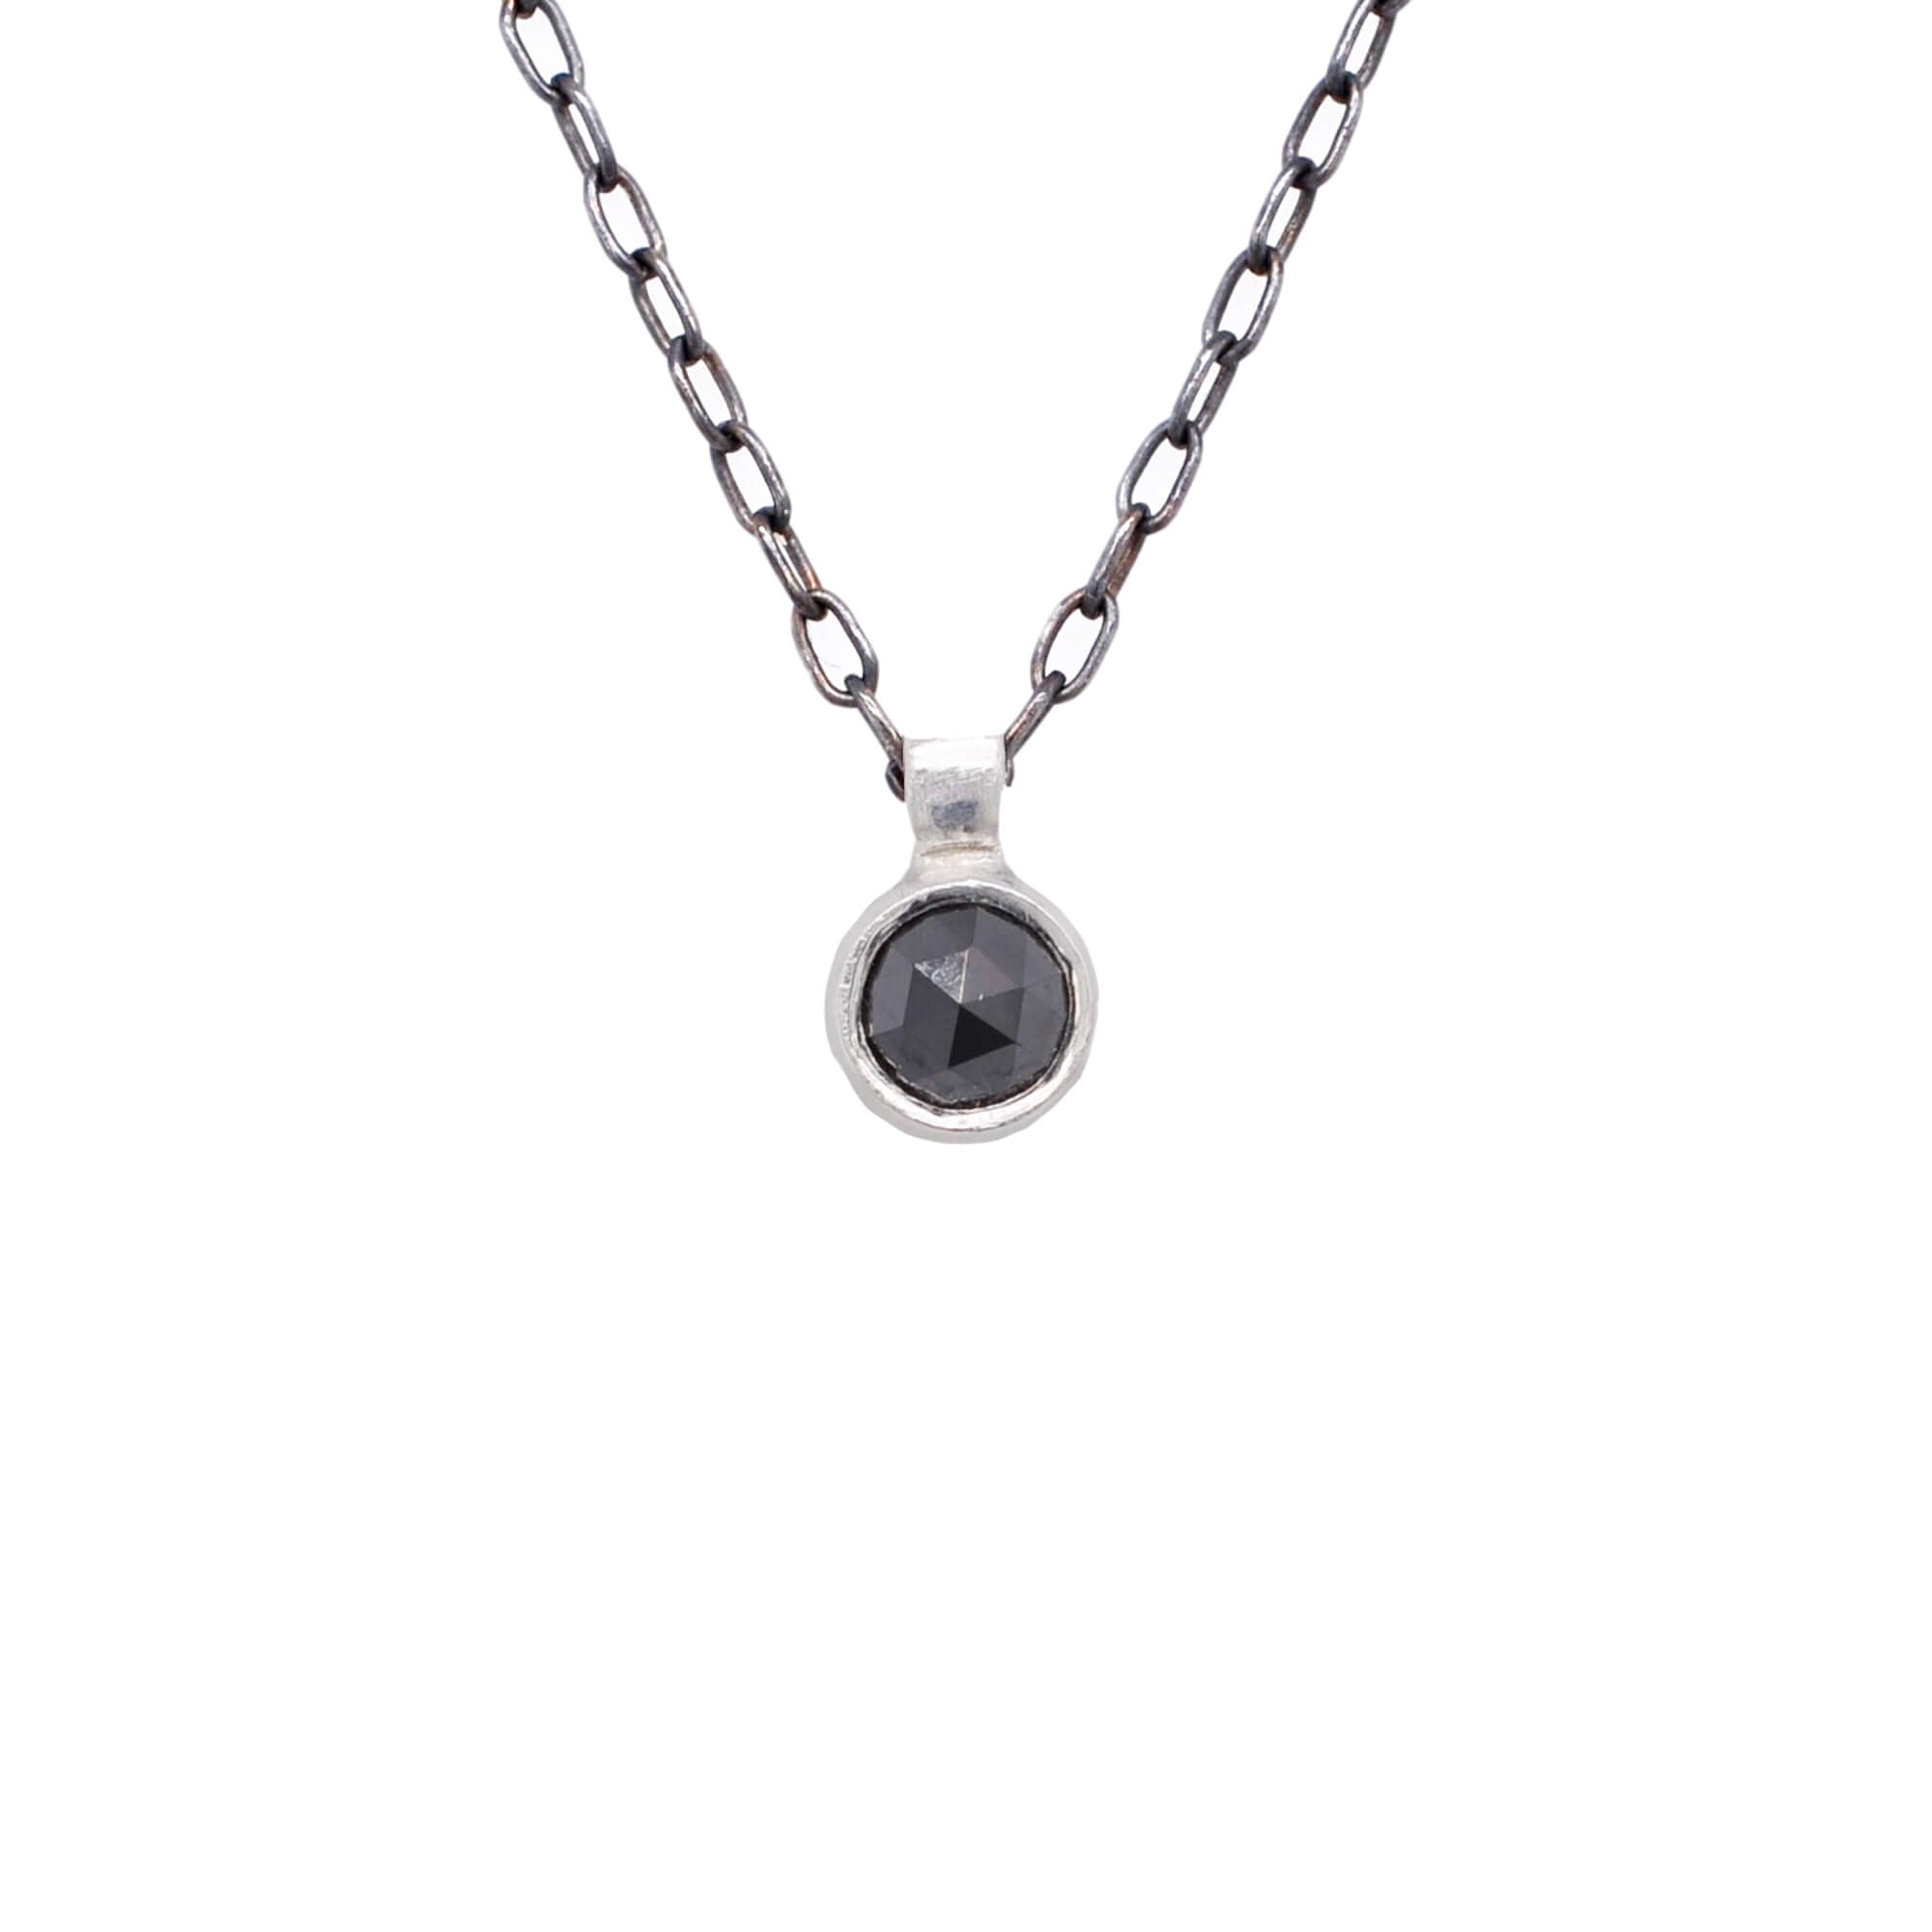 Black rose cut diamond pendant bezel set in sterling silver on an oxidized silver chain. Handmade with recycled metal and conflict-free stone. EC Design Studio, Minneapolis, MN.